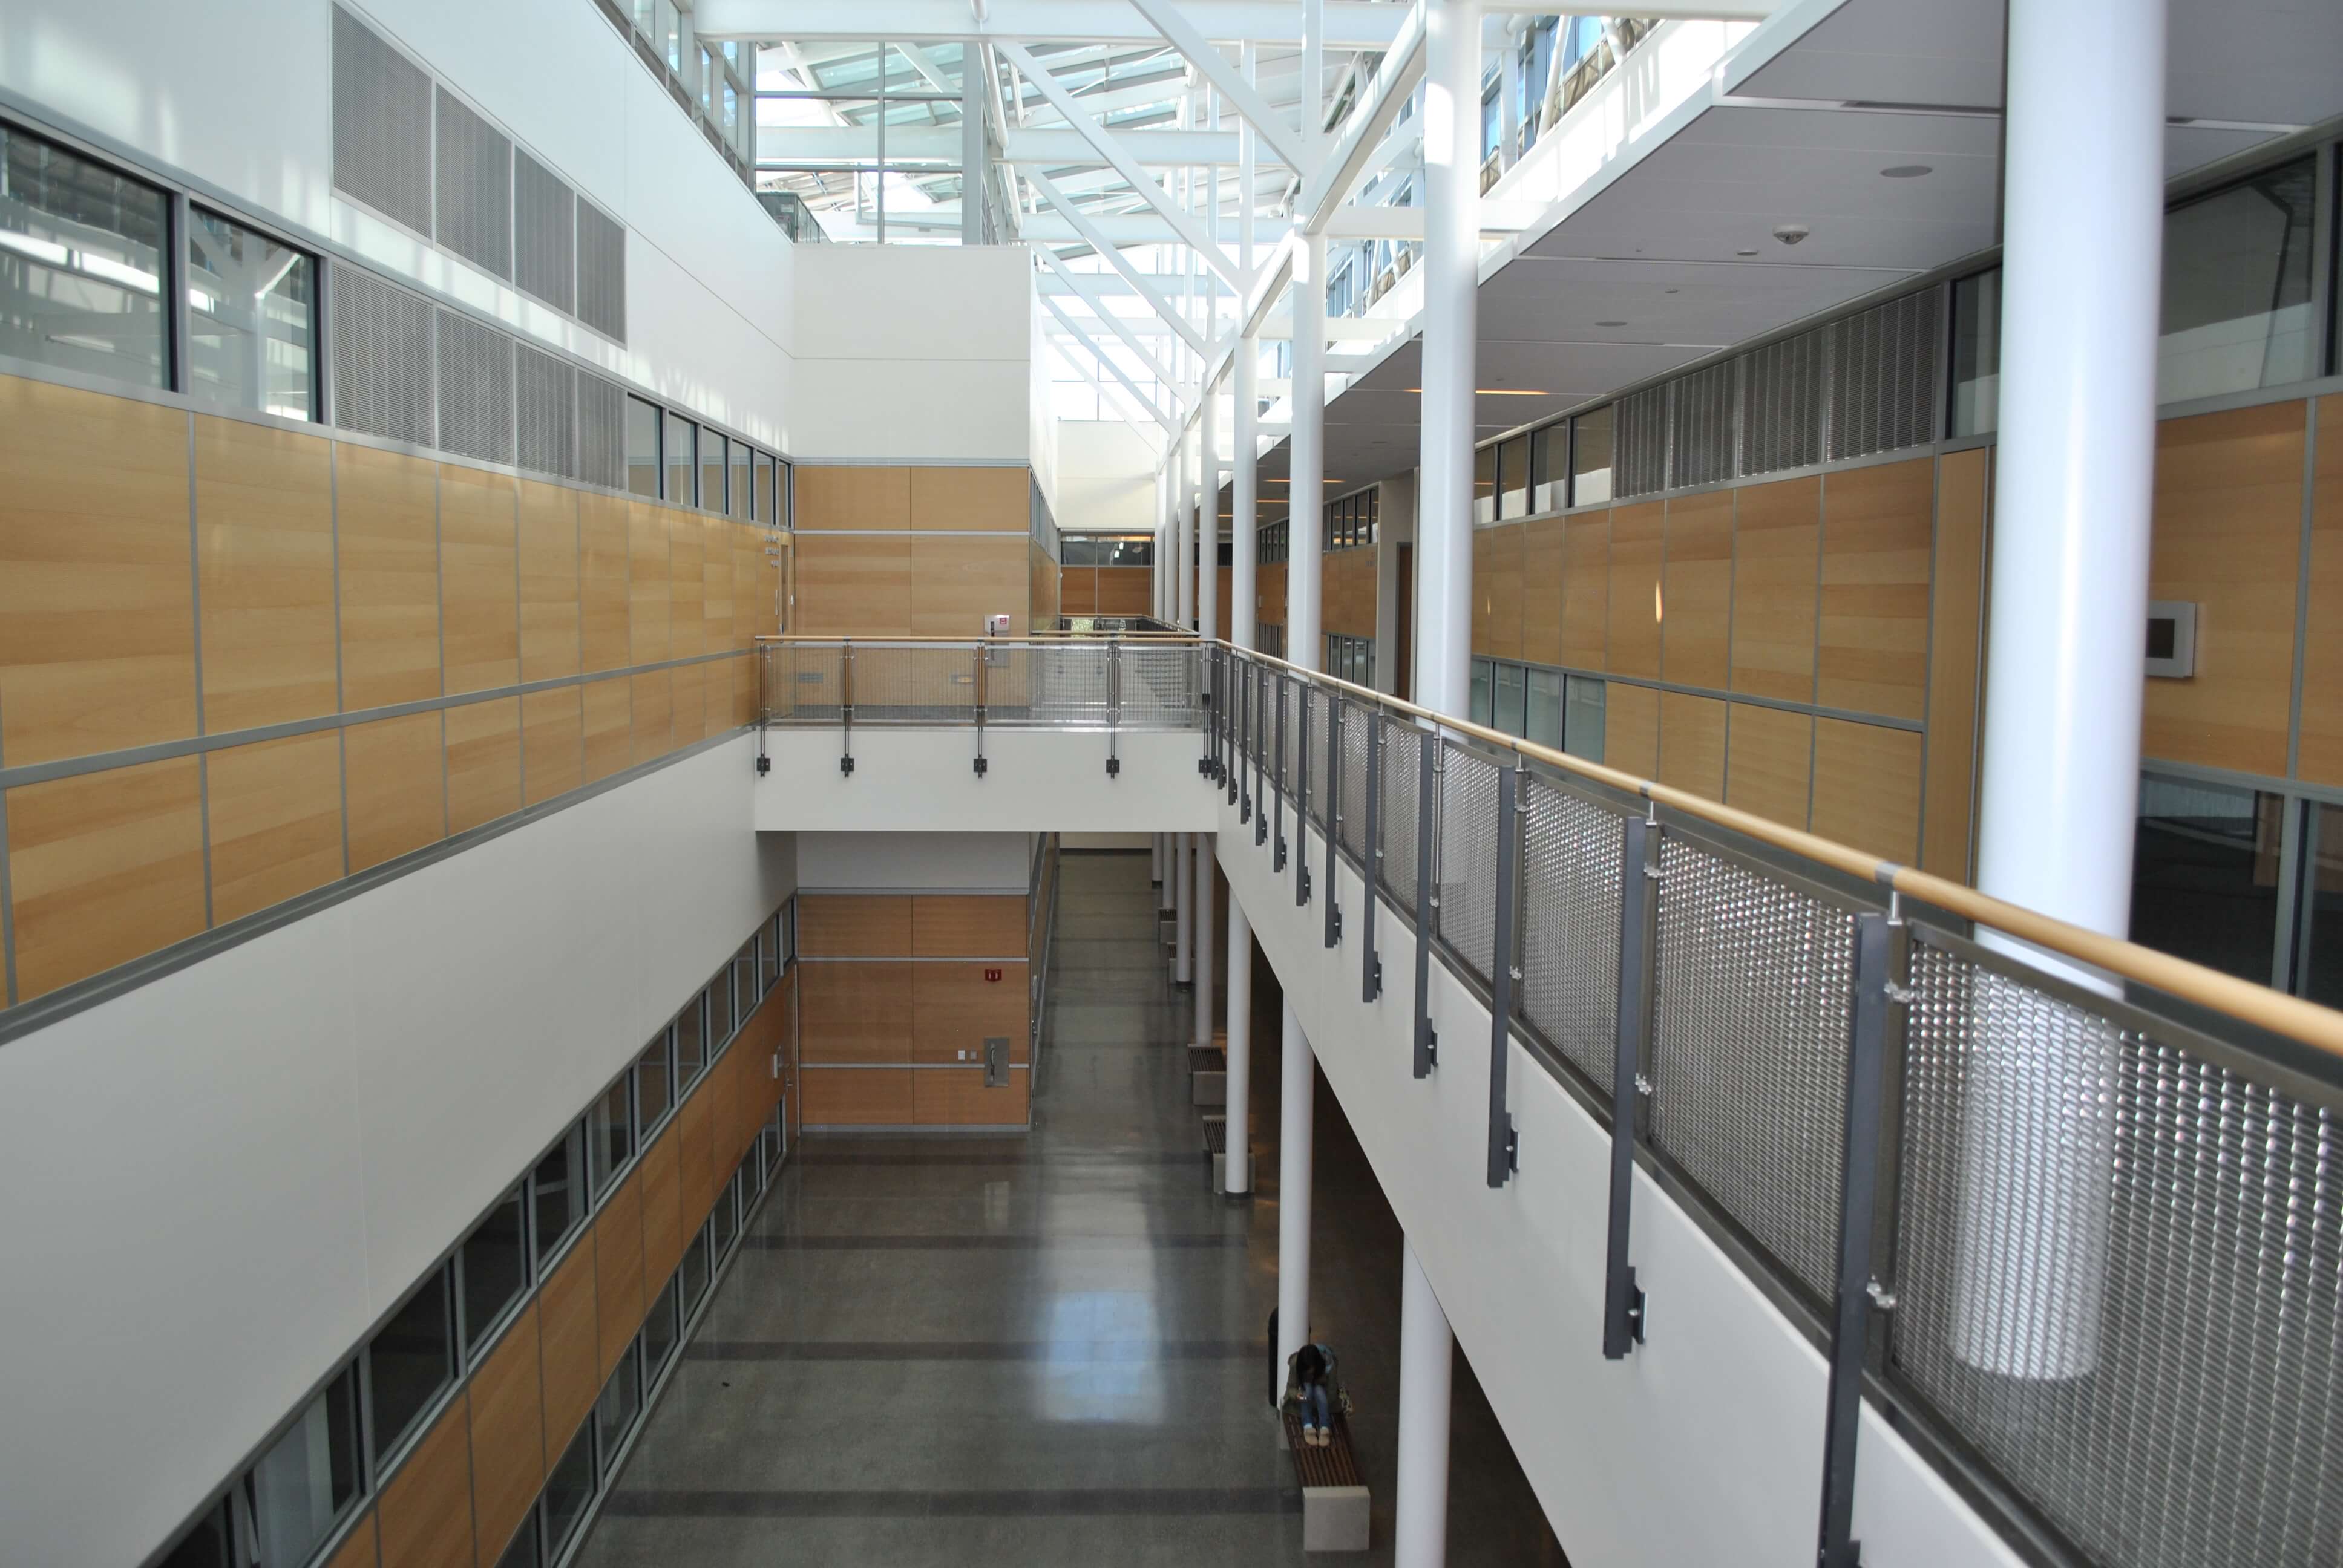 Ferric guardrail with wood top rail and woven mesh infill panels at De Anza College, CA.